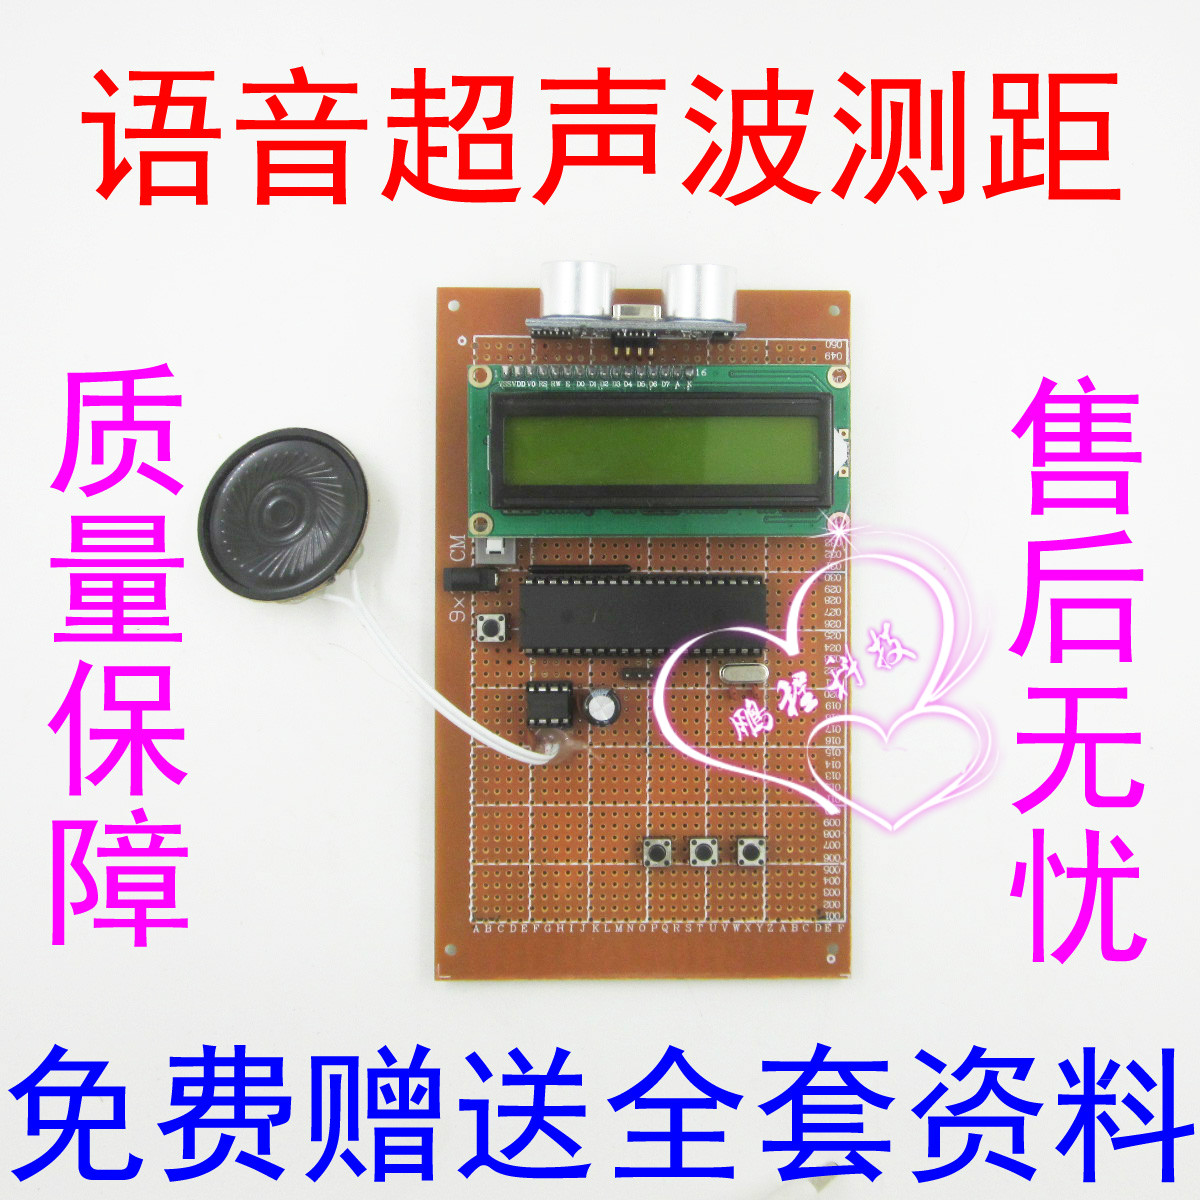 Diy Electronic Design of 51 Single Chip Microcomputer Ultrasound Range Finder Speech Broadcasting System for Automobile Anti-collision